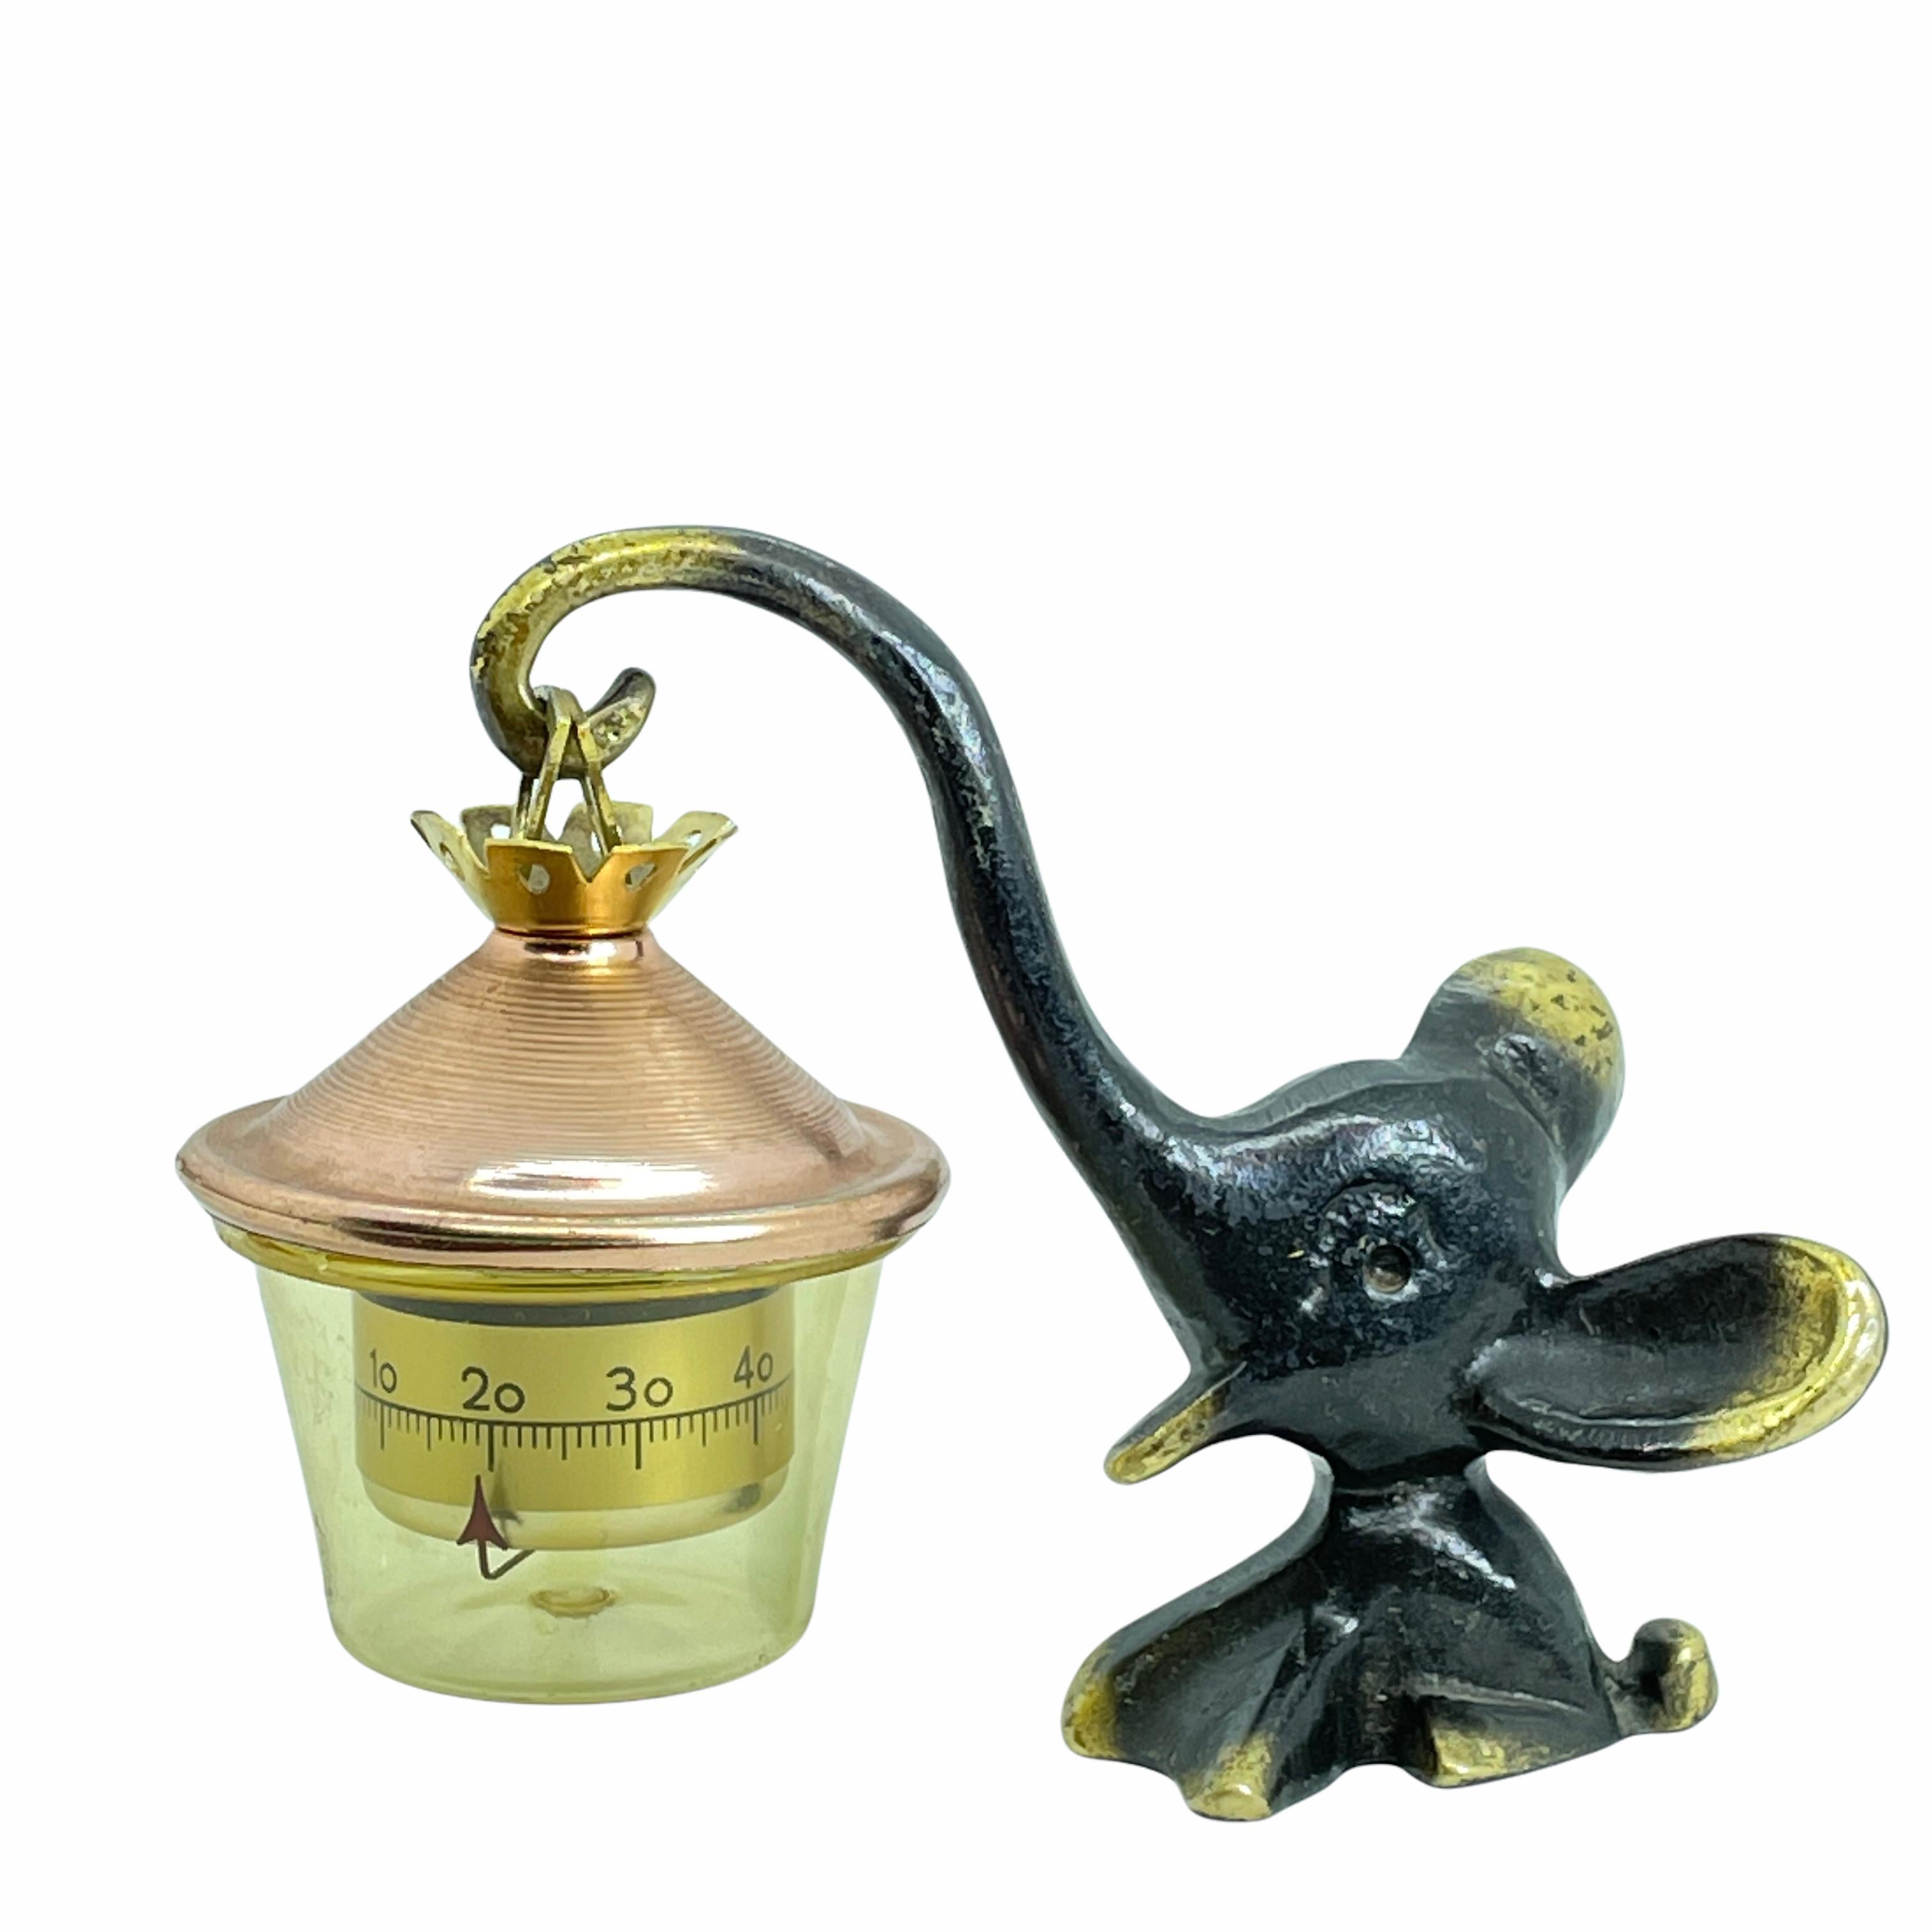 Classic early 1960s Austrian figurine, designed by Walter Bosse. Nice addition to your room, on your desk top or just for your collection of Austrian midcentury items. Charming, big and solid this elephant figurine is made of brass. A very humorous